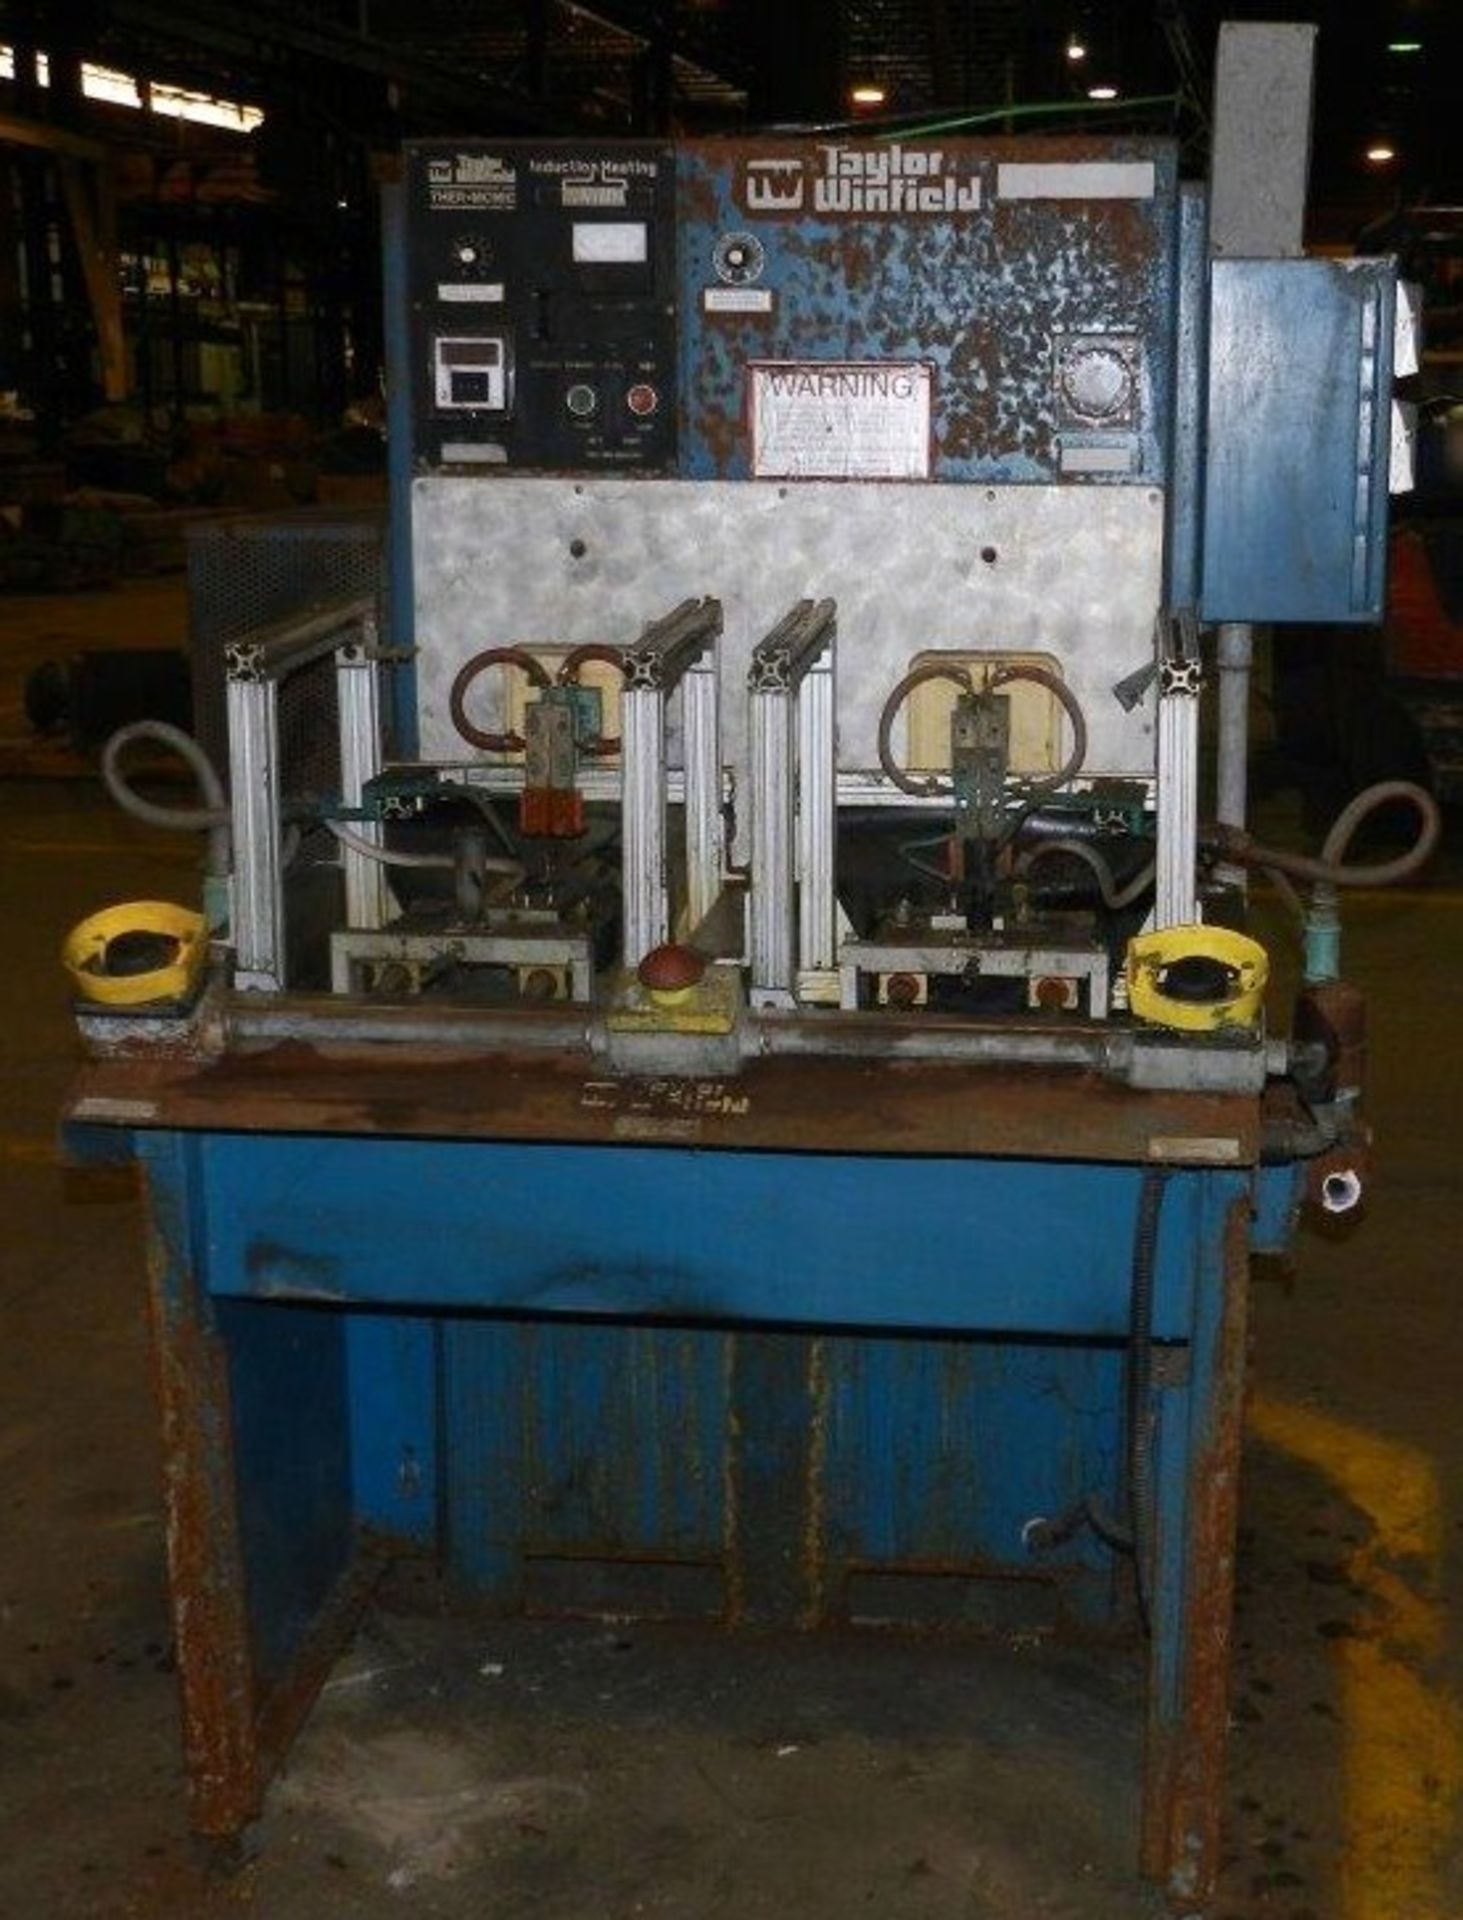 Taylor Winfield CE-3000 30 kW Dual Station Induction Hardener